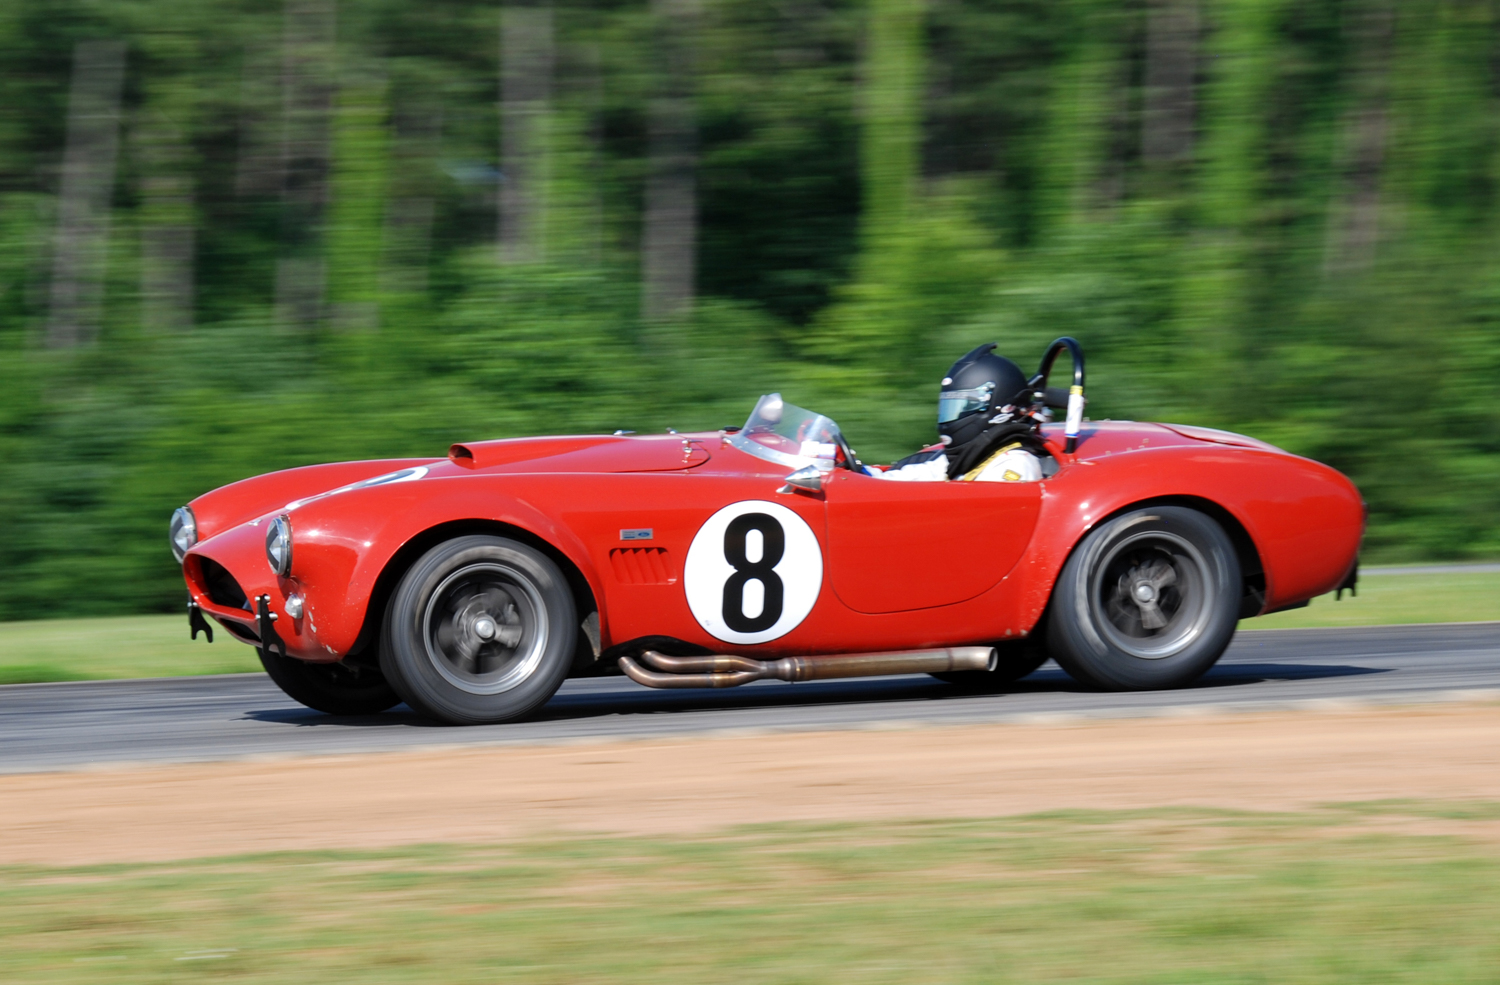 Lorne Leibel accelerates down the back straight in his 1964 Shelby Cobra 289. 